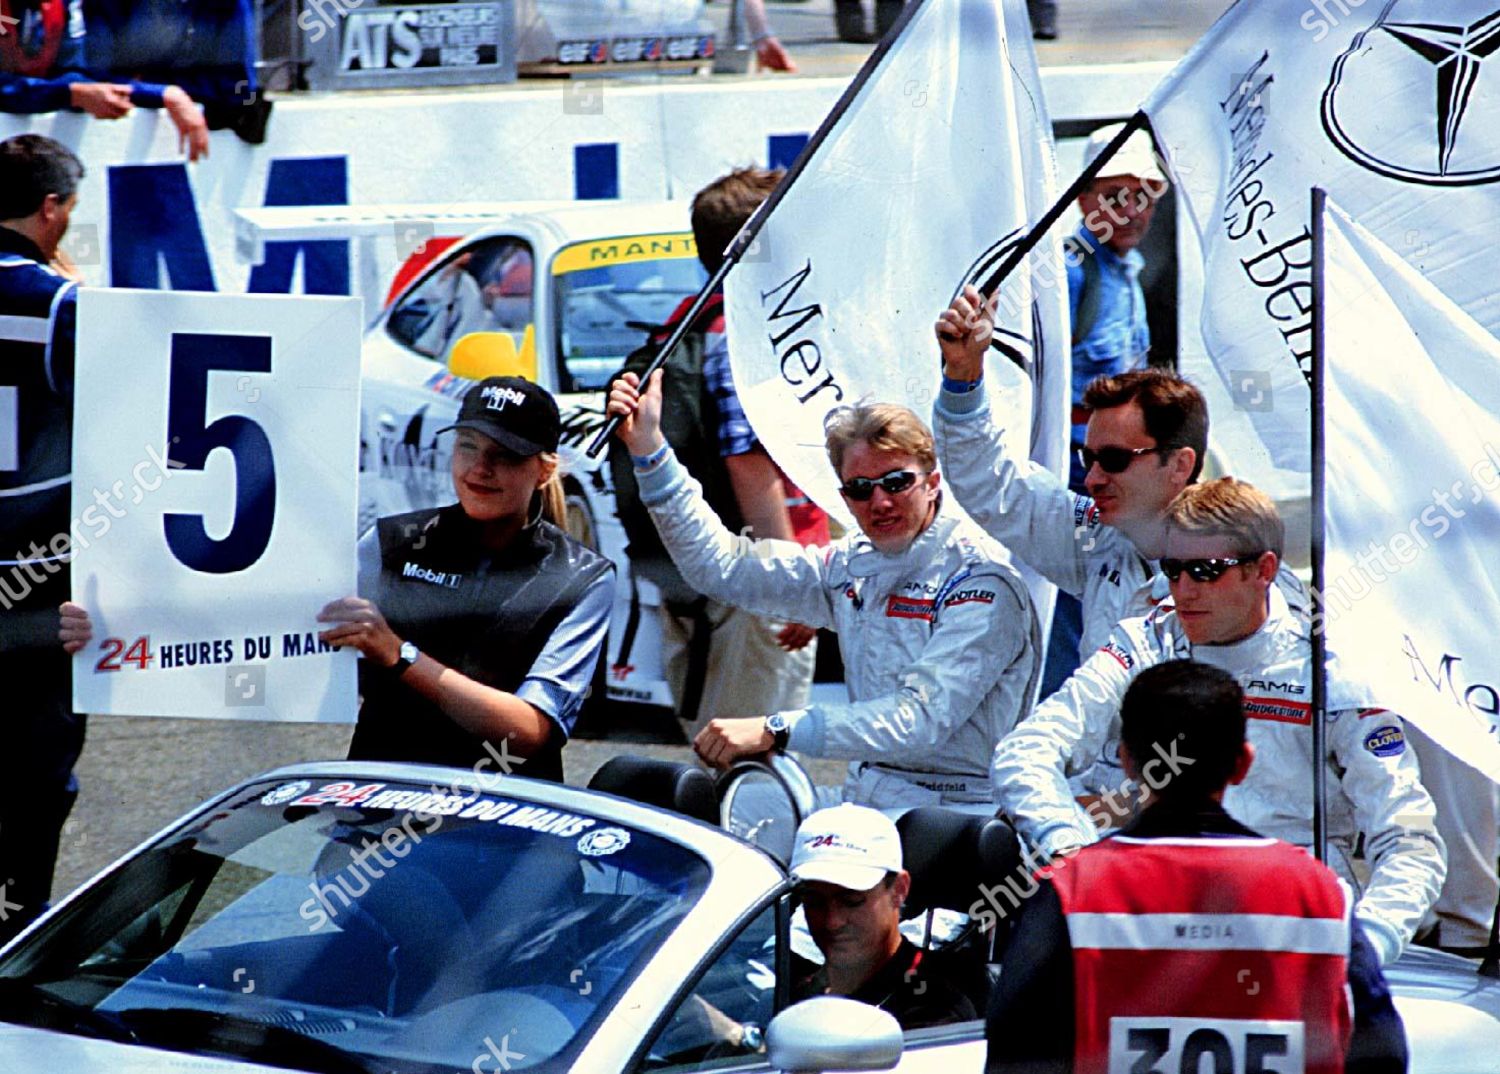 nick heidfeld christophe bouchut illfated peter dumbreck editorial stock photo stock image shutterstock https www shutterstock com editorial image editorial le mans car race france 1999 307043v